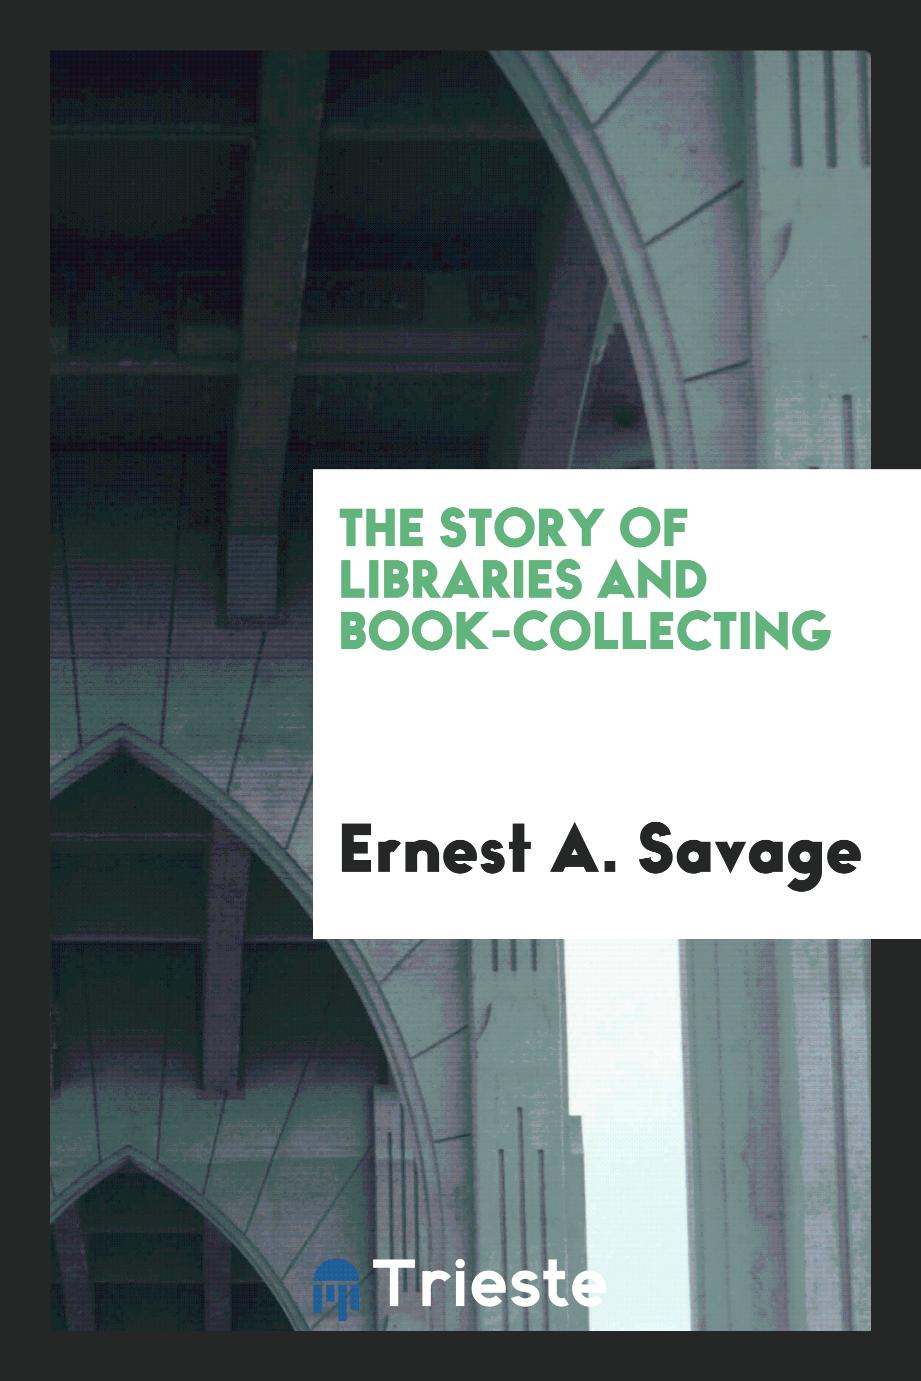 Ernest A. Savage - The story of libraries and book-collecting